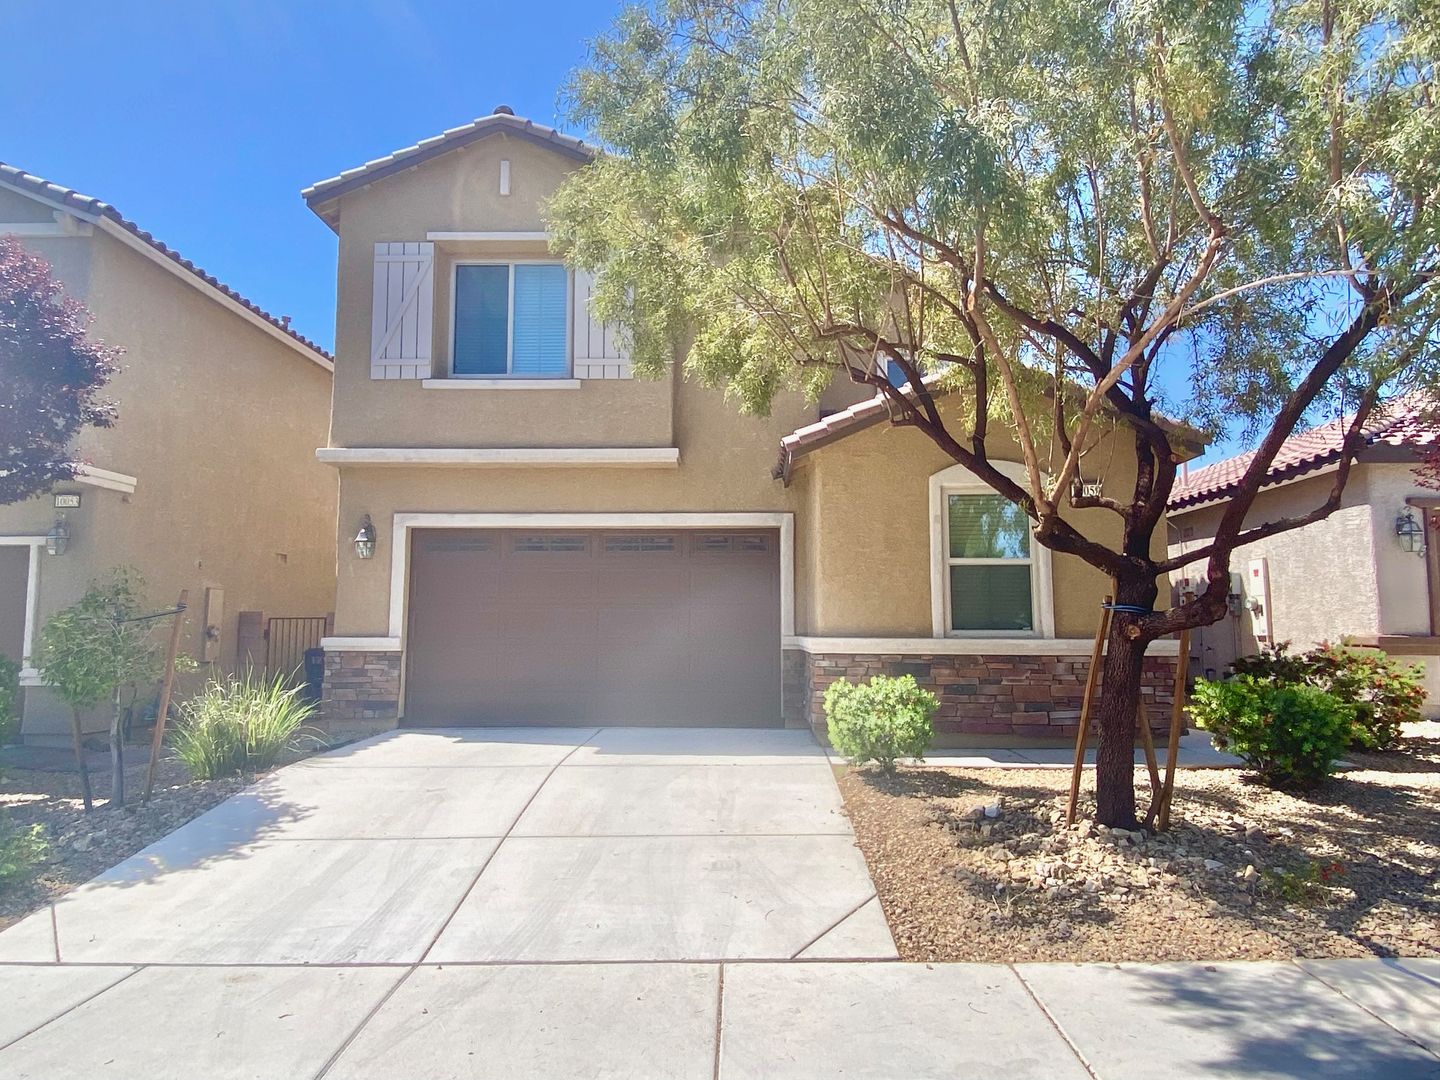 STUNNING 2 STORY HOME LOCATED IN A GATED COMMUNITY, W/ 2 CAR GARAGE, COMMUNITY PARK, NO CARPET